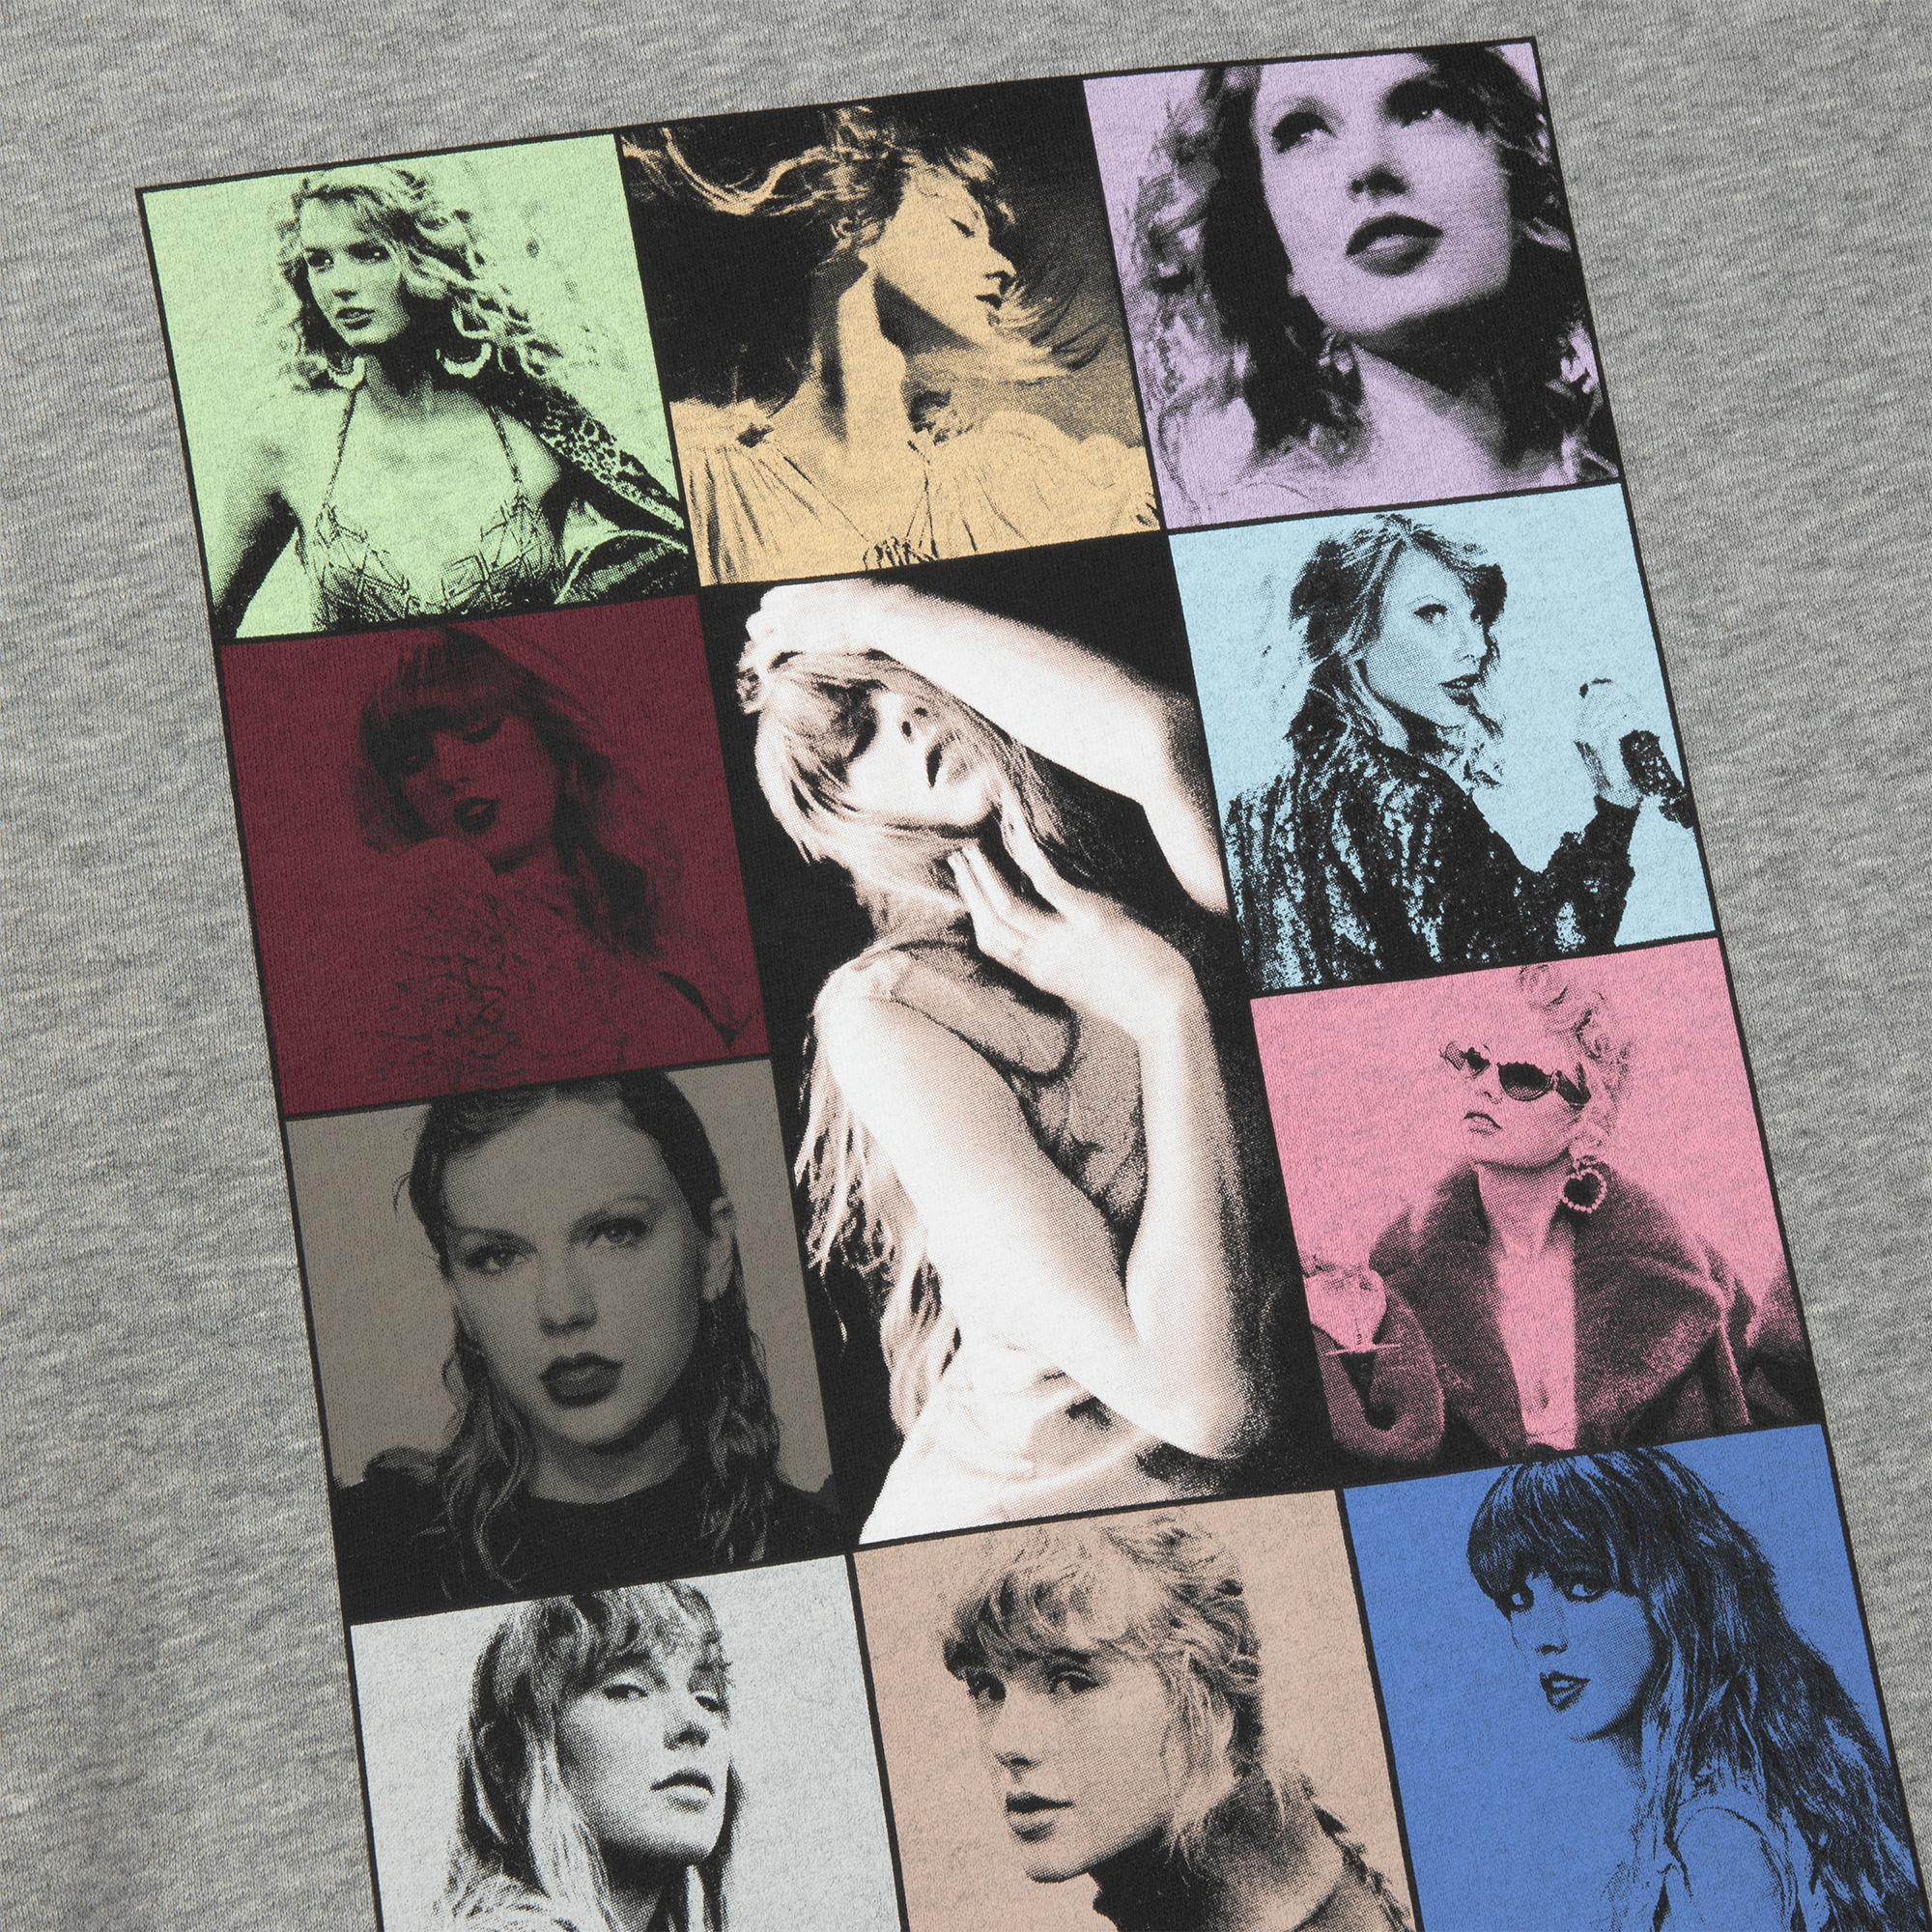 Taylor Swift | The Eras II Tour Gray Crewneck - Taylor Swift Official Store